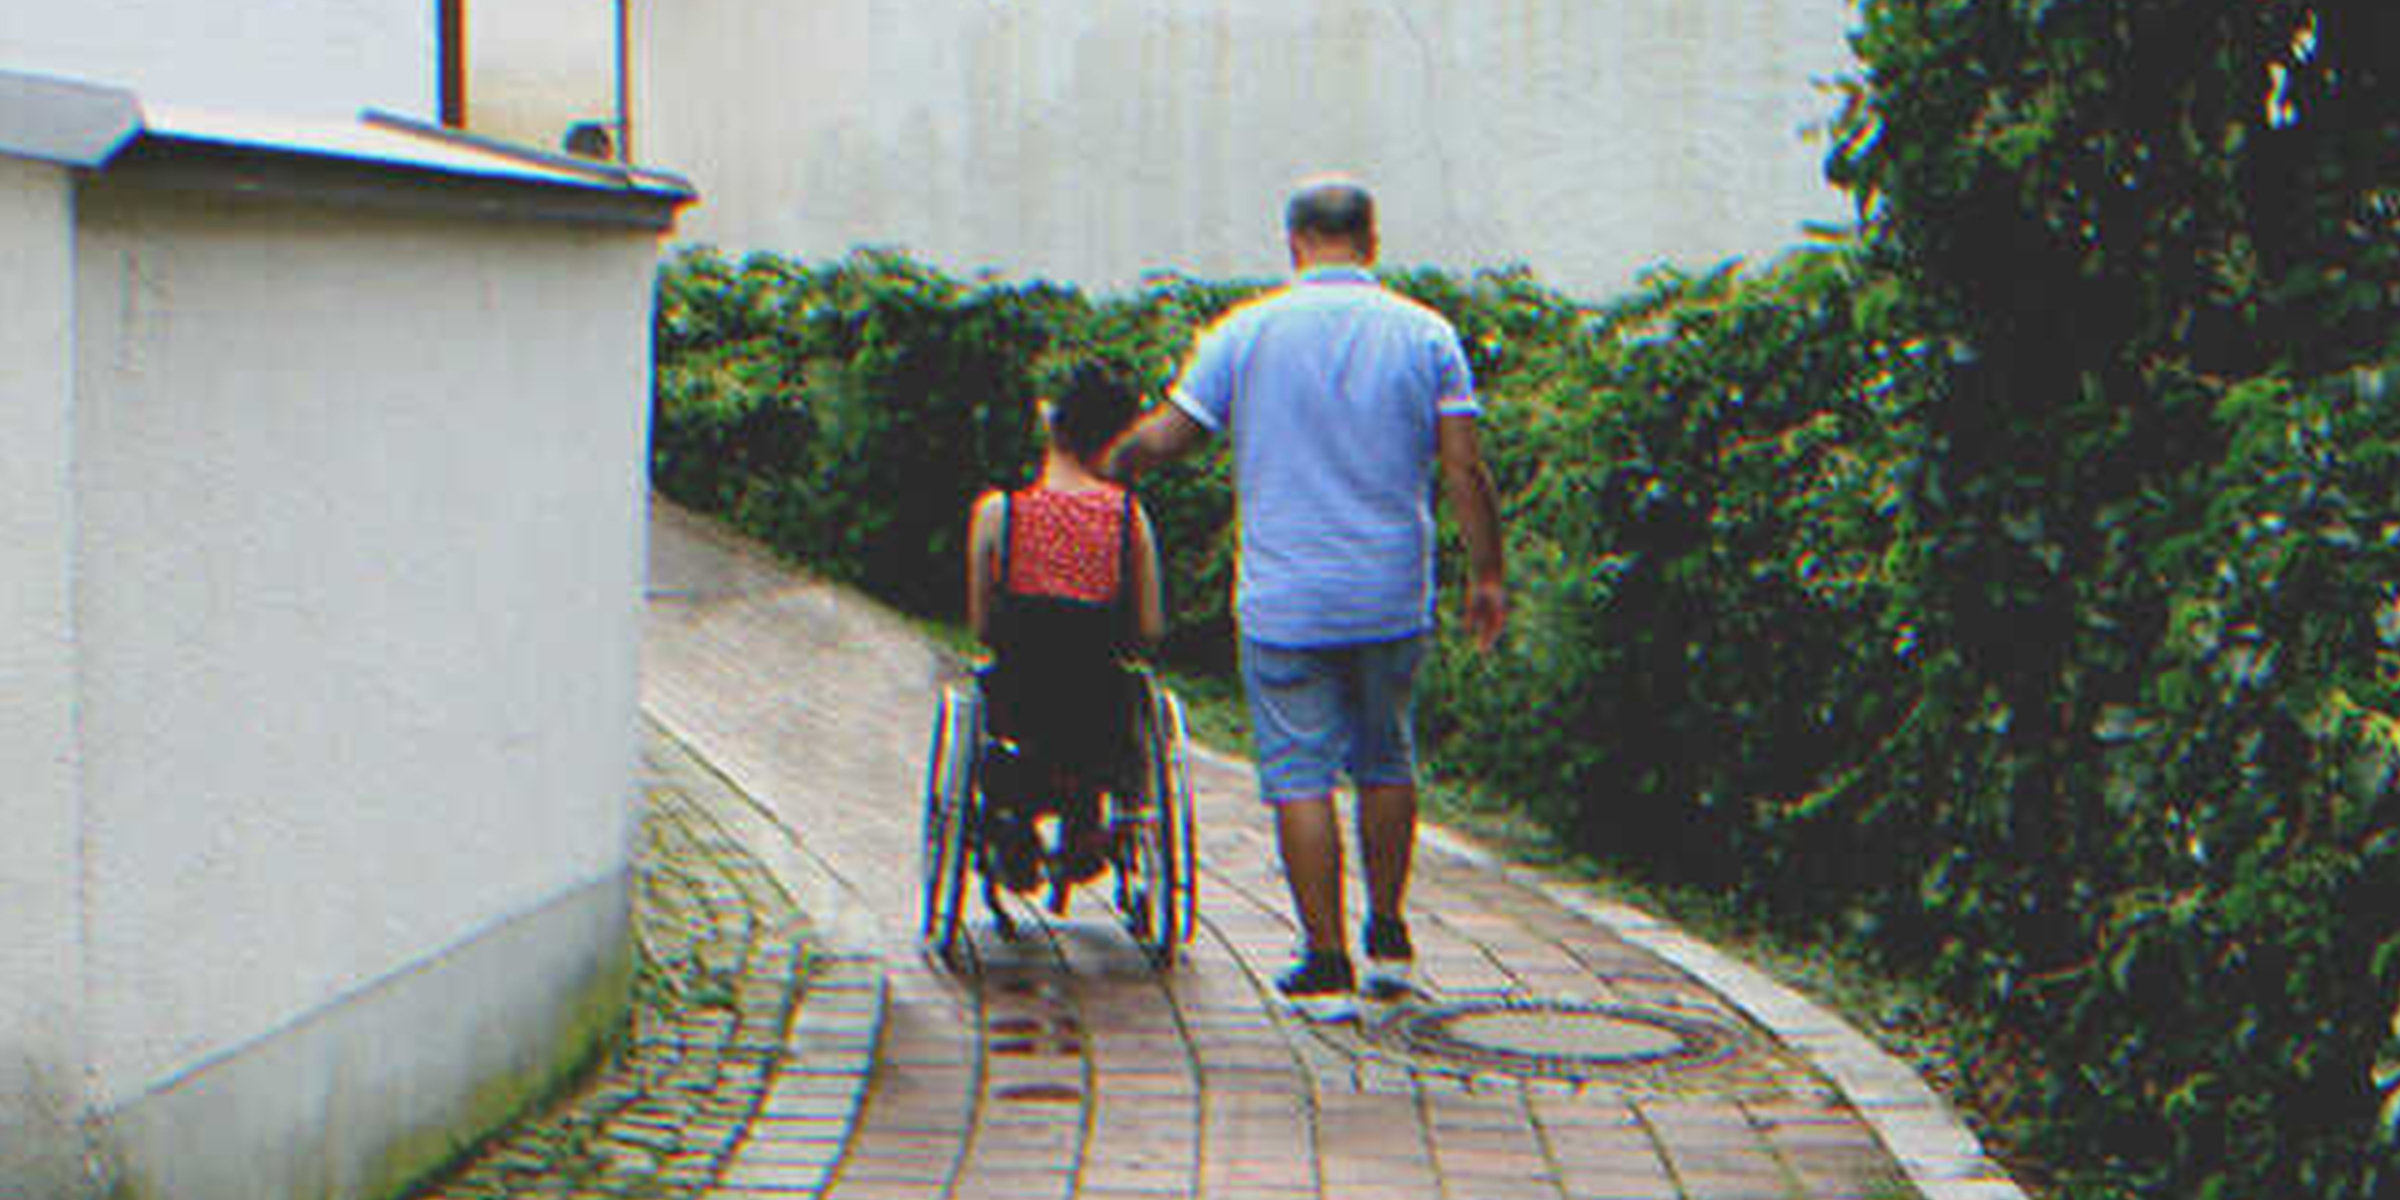 Man with young girl in wheelchair | Source: Shutterstock